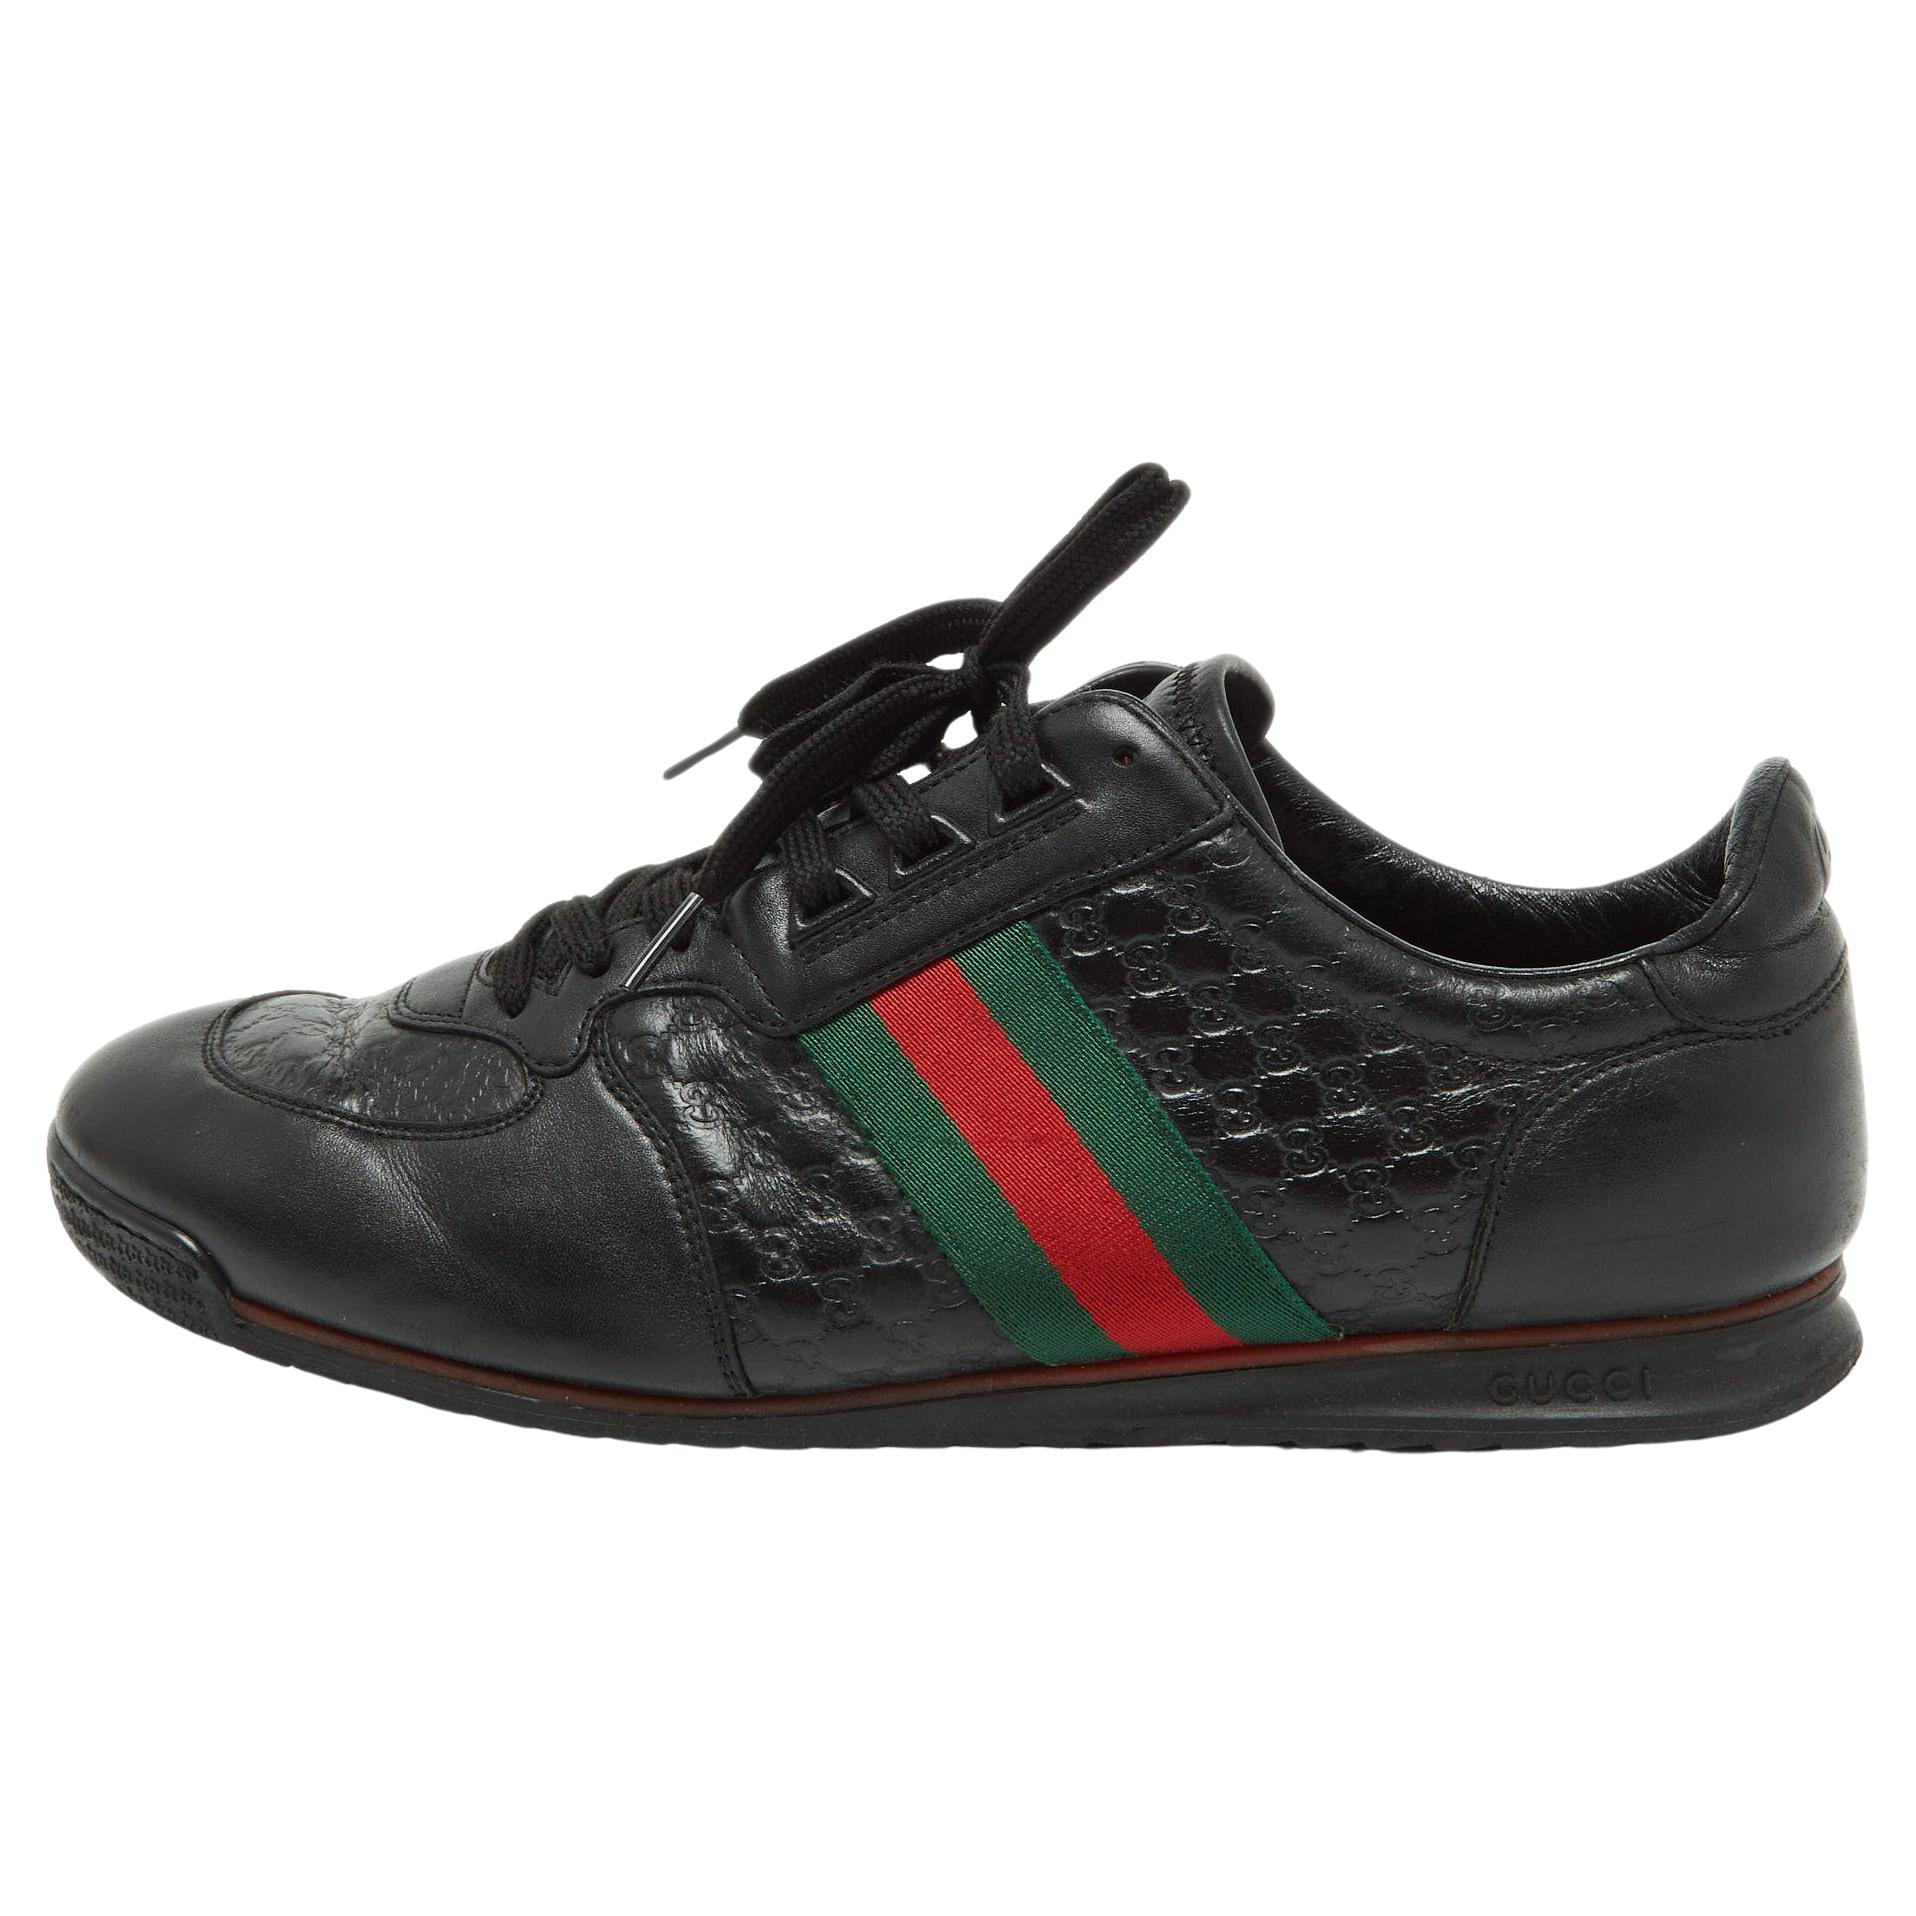 Gucci Black Leather Web Lace Up Sneakers Size 45.5